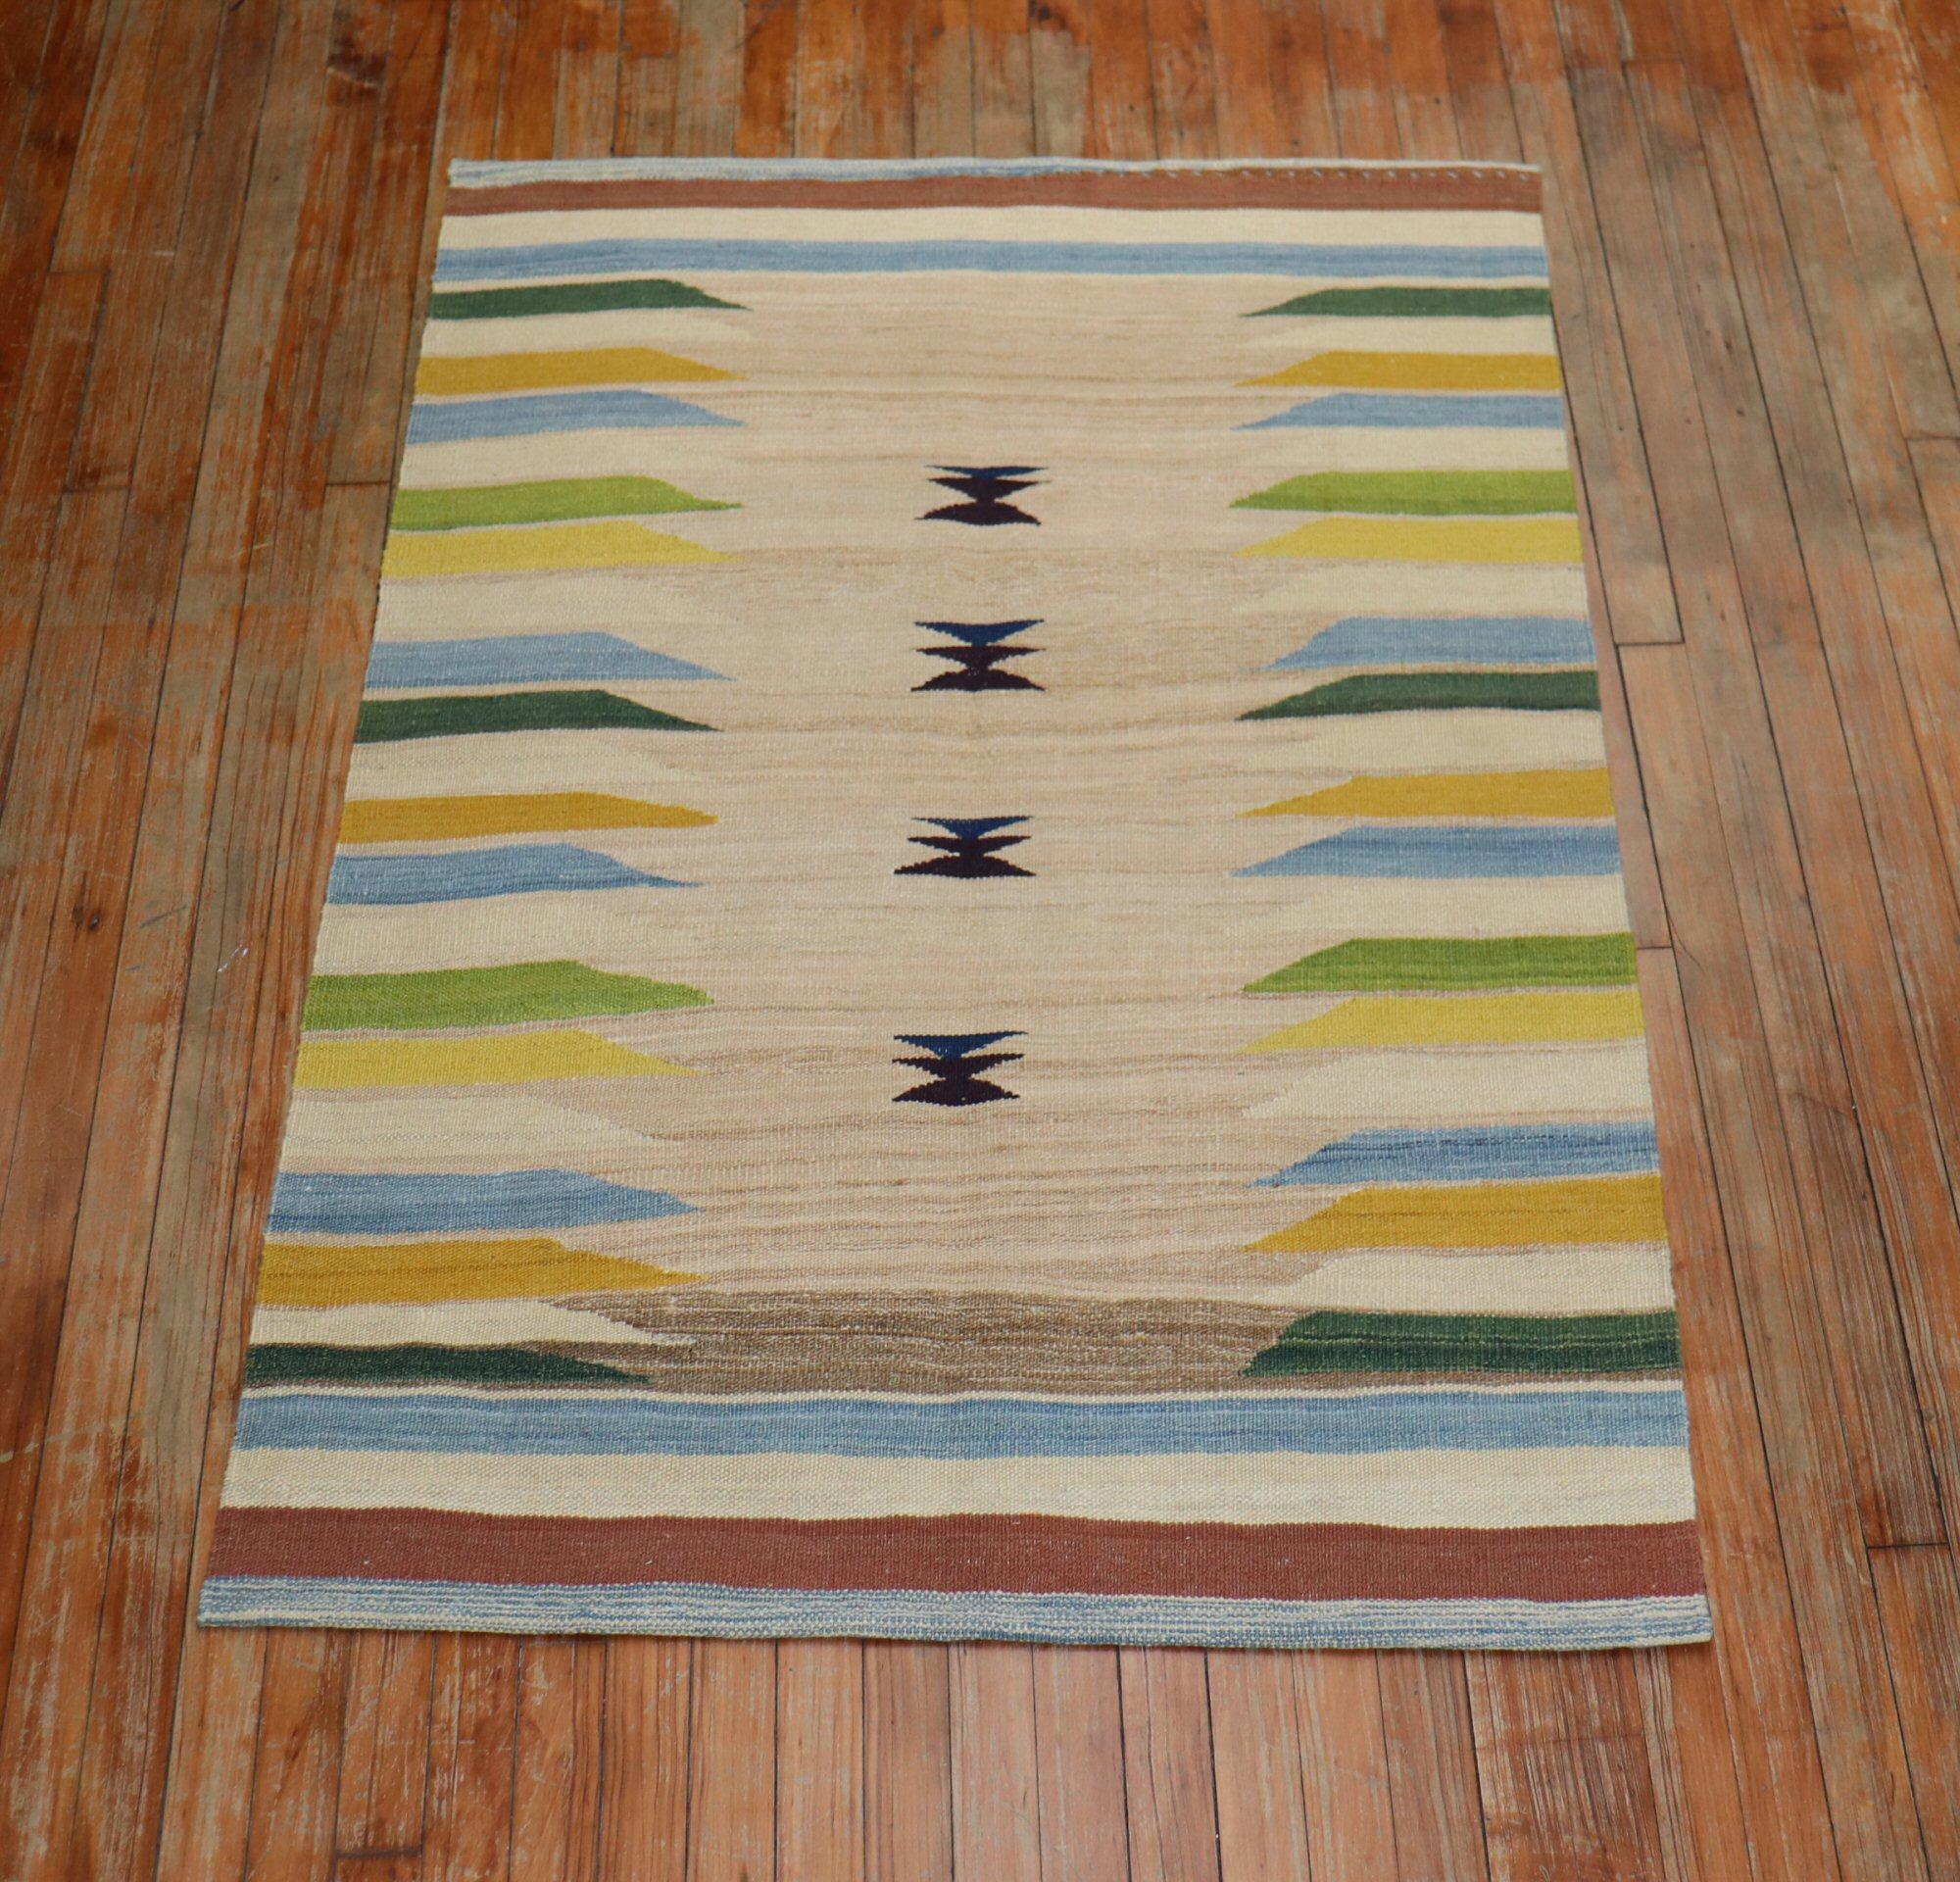 One of a kind modern Persian Kilim with Mid-Century Modern vibes

Measures: 3'4